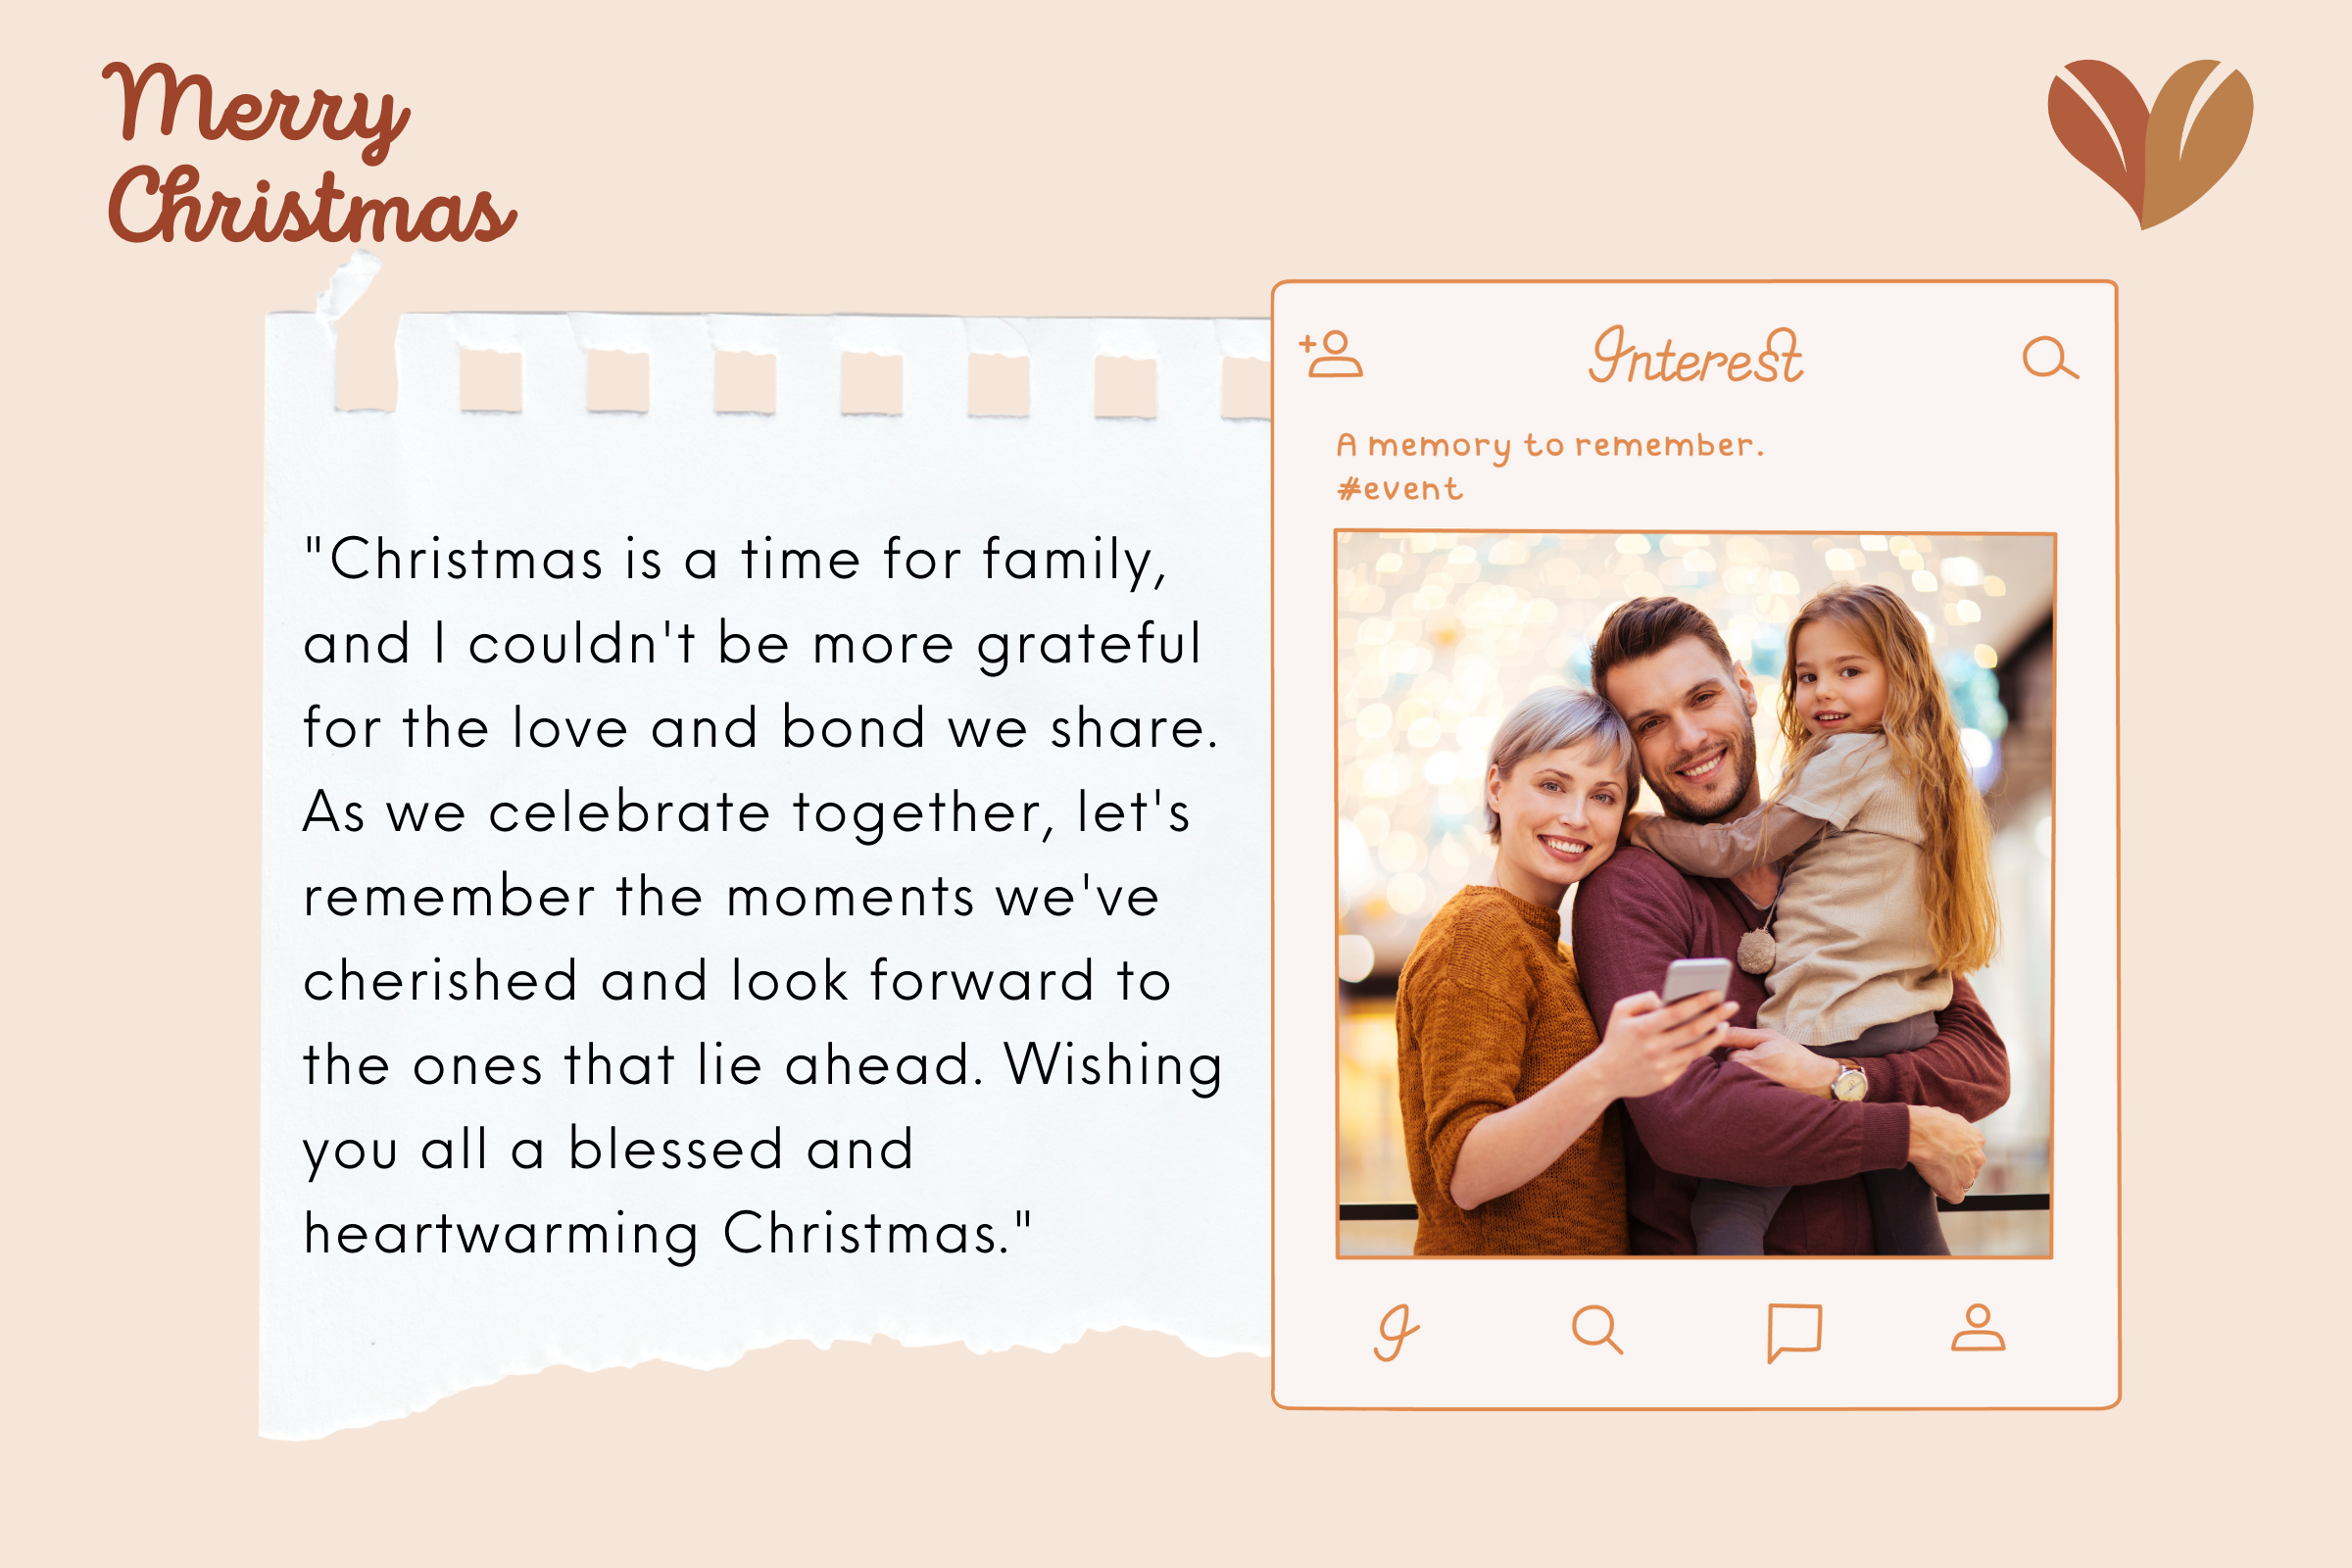 Heartwarming christmas messages you should know